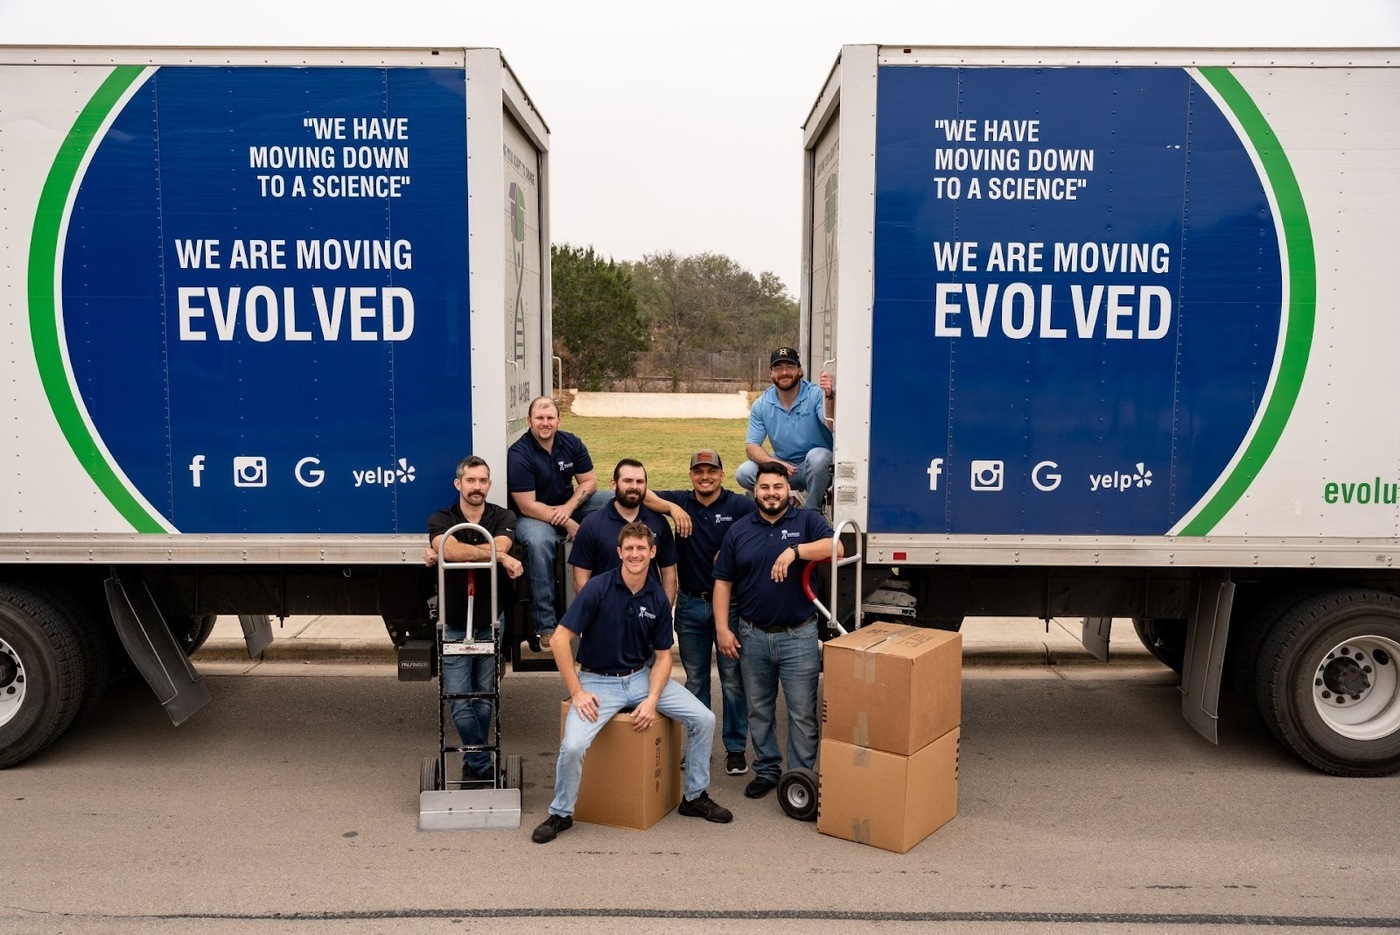 The family-owned business has become the go-to moving company for residential and commercial clients in San Antonio and the surrounding areas because of its impeccable services and solid customer support.